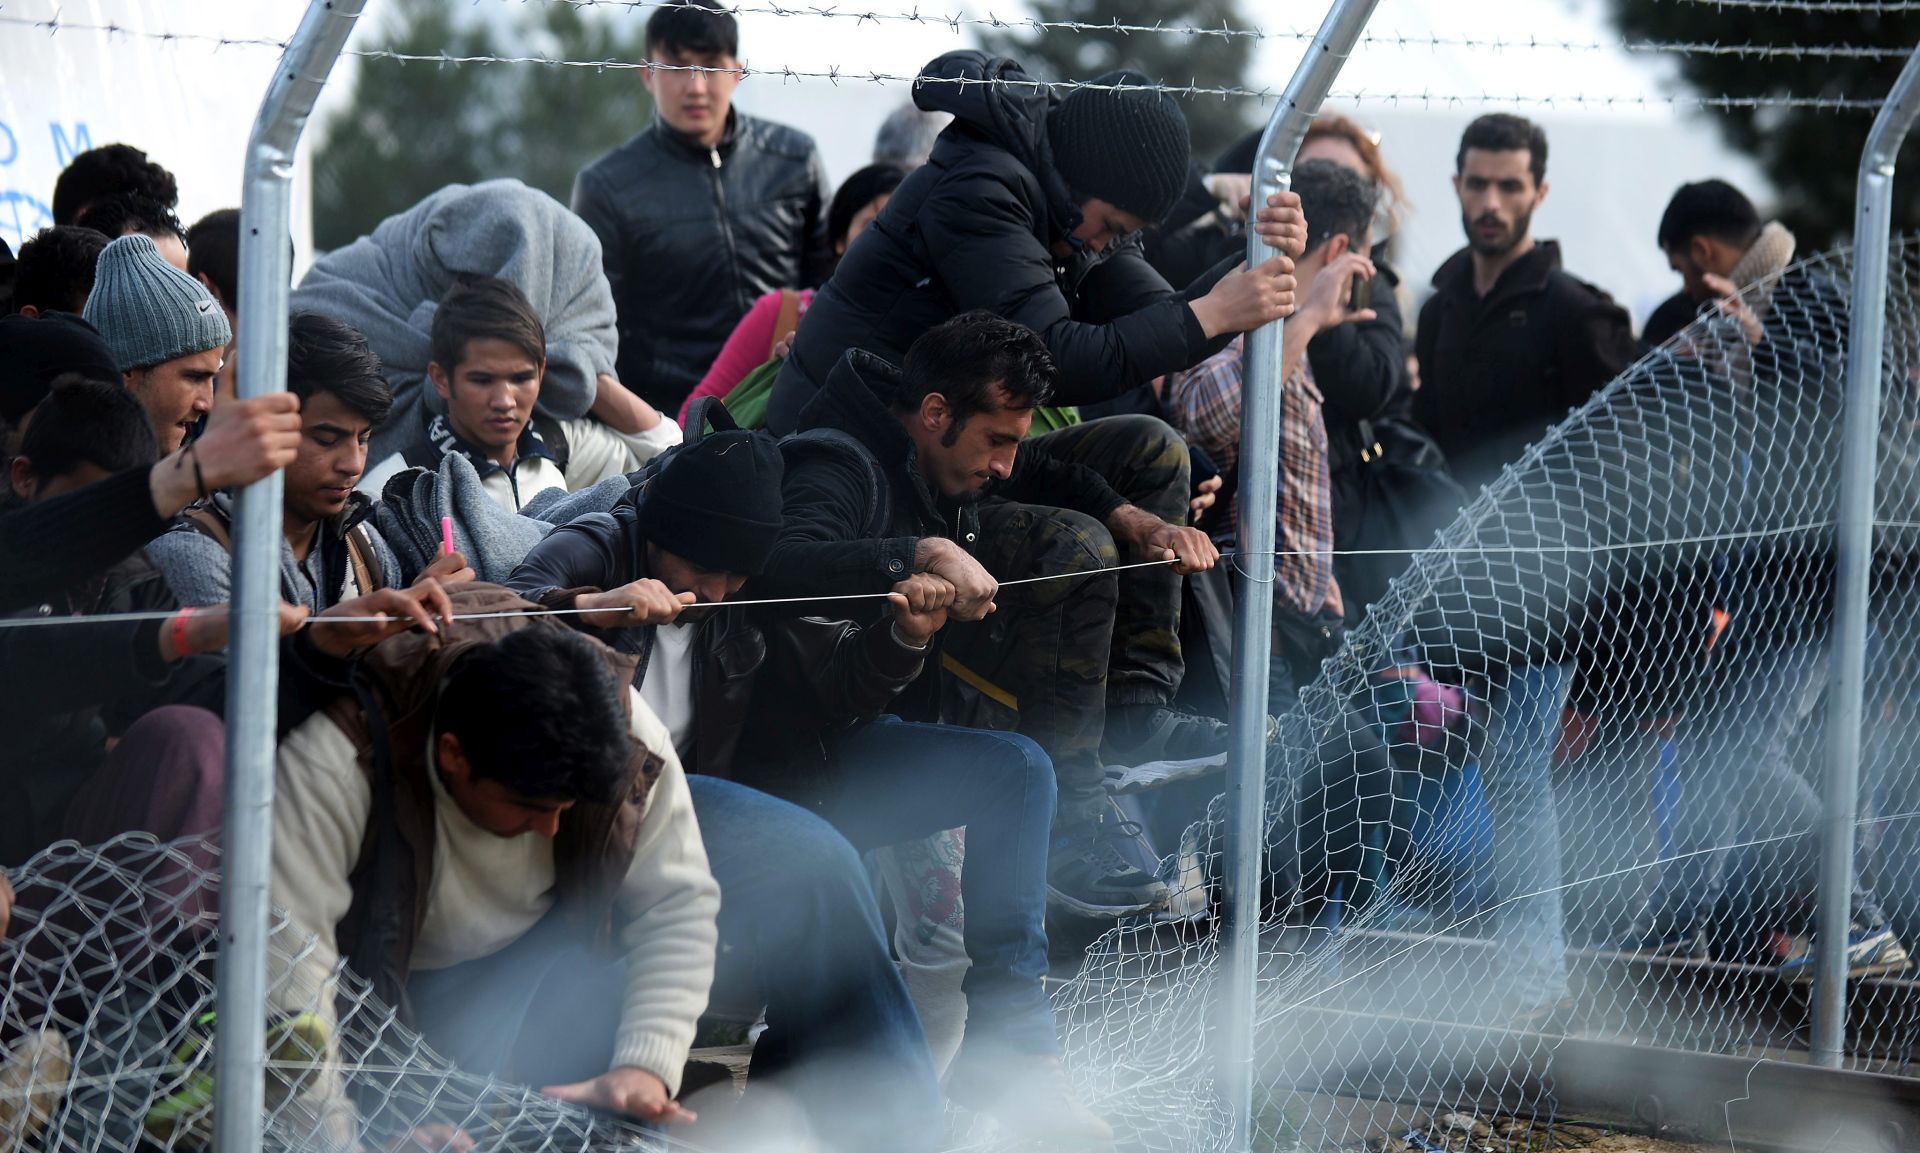 epa05175489 Migrants try to cross through a fence at the Greek-Macedonian border, near the Macedonian city of Gevgelija, 22 February 2016. Macedonia confirmed that it is only allowing Syrian and Iraqi refugees through, matching a decision by its northern neighbour, Serbia. Around 5,000 people were waiting at the border on 22 February, local reports said, quoting witnesses. All want to continue their journey across Macedonia, Serbia, Croatia, Slovenia and then Austria, with Germany the final goal for most.  EPA/NAKE BATEV